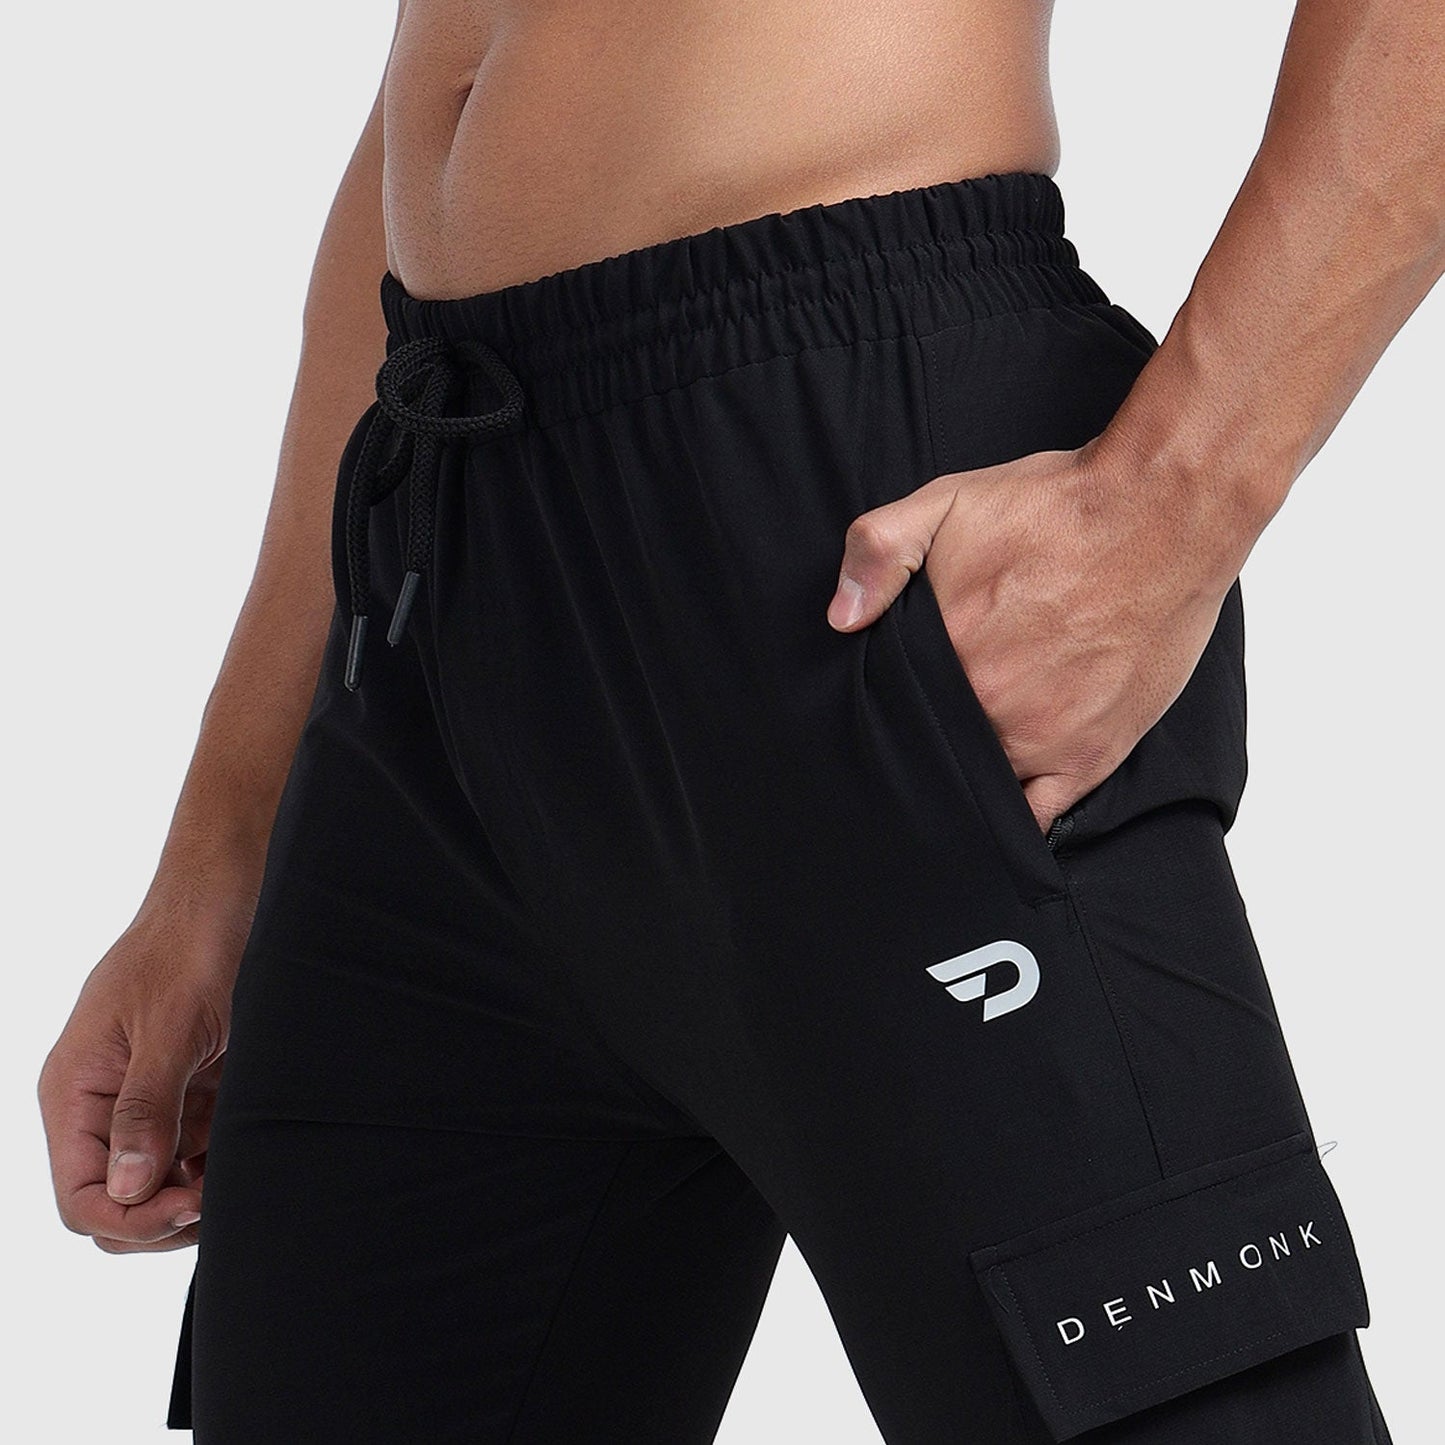 Denmonk: Elevate your look with these Cragopro sharp black Trackpant for mens.